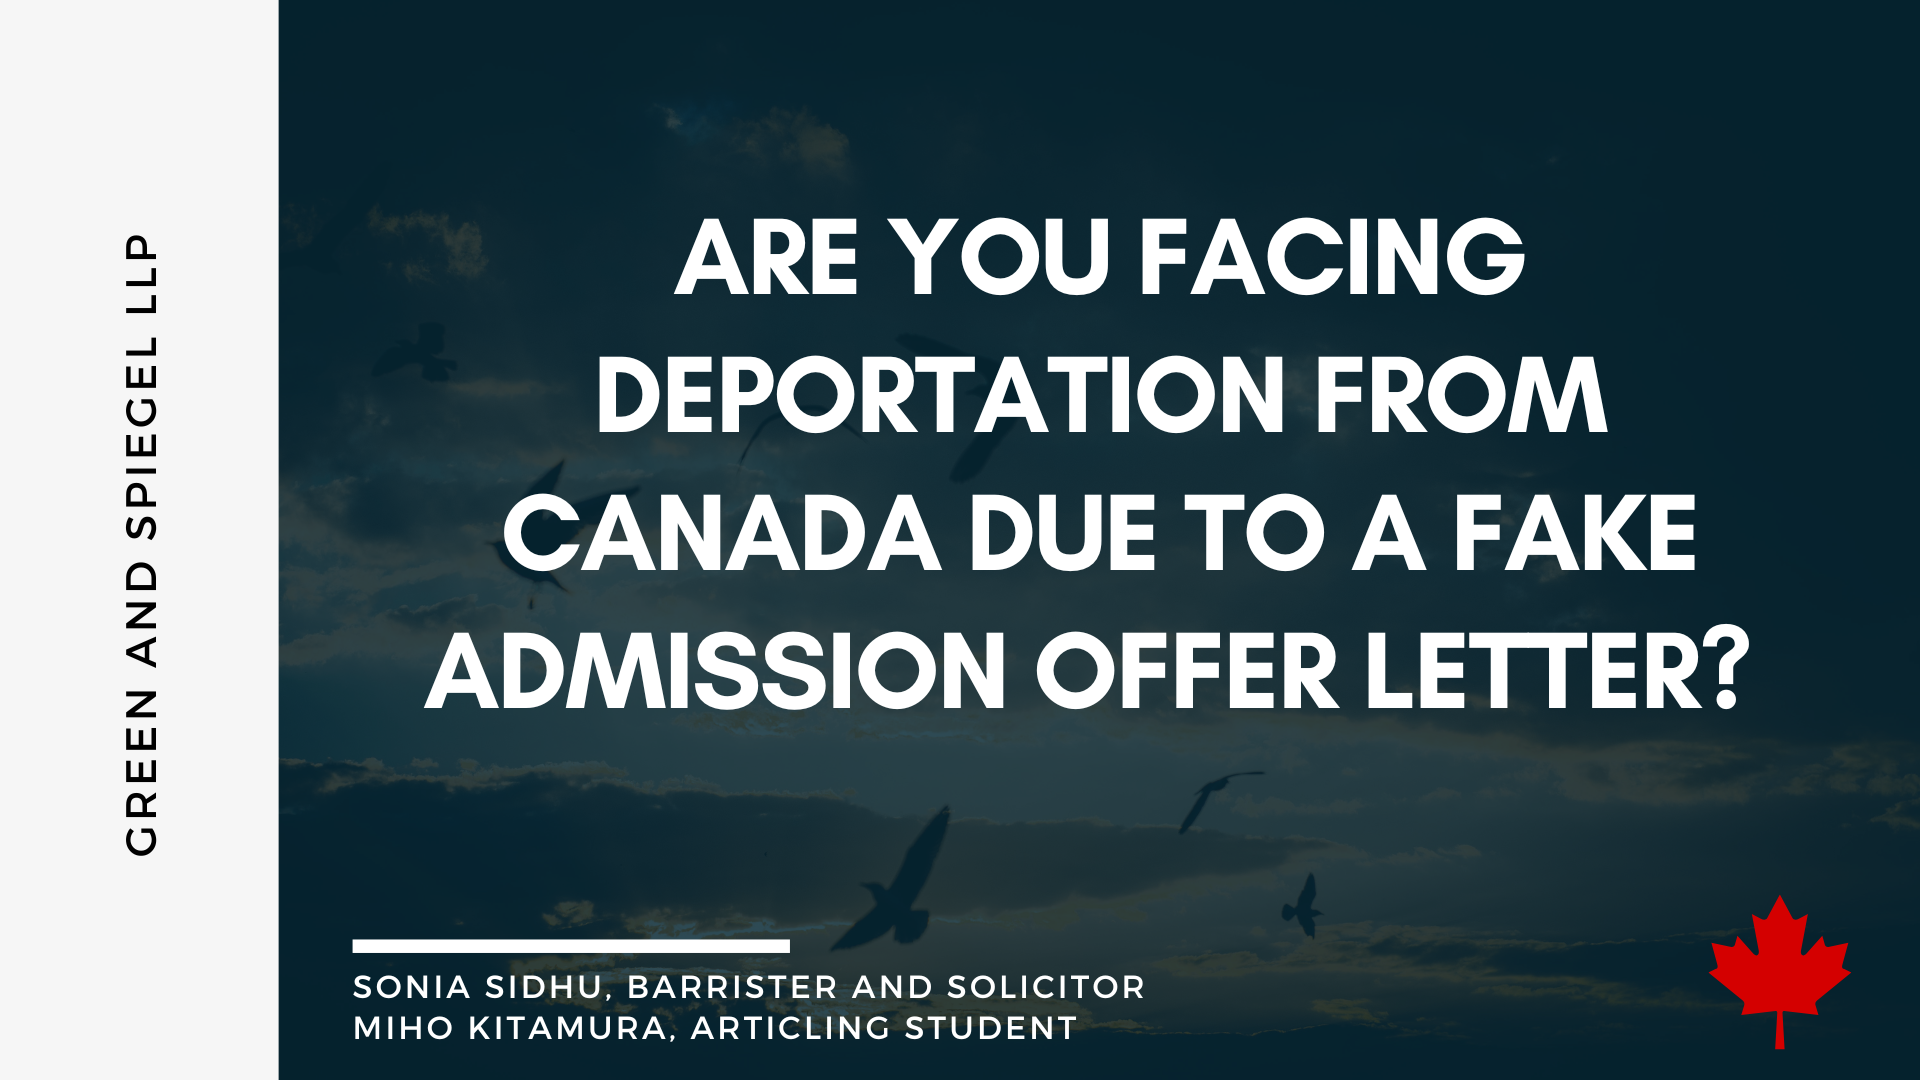 ARE YOU FACING DEPORTATION FROM CANADA DUE TO A FAKE ADMISSION OFFER LETTER?